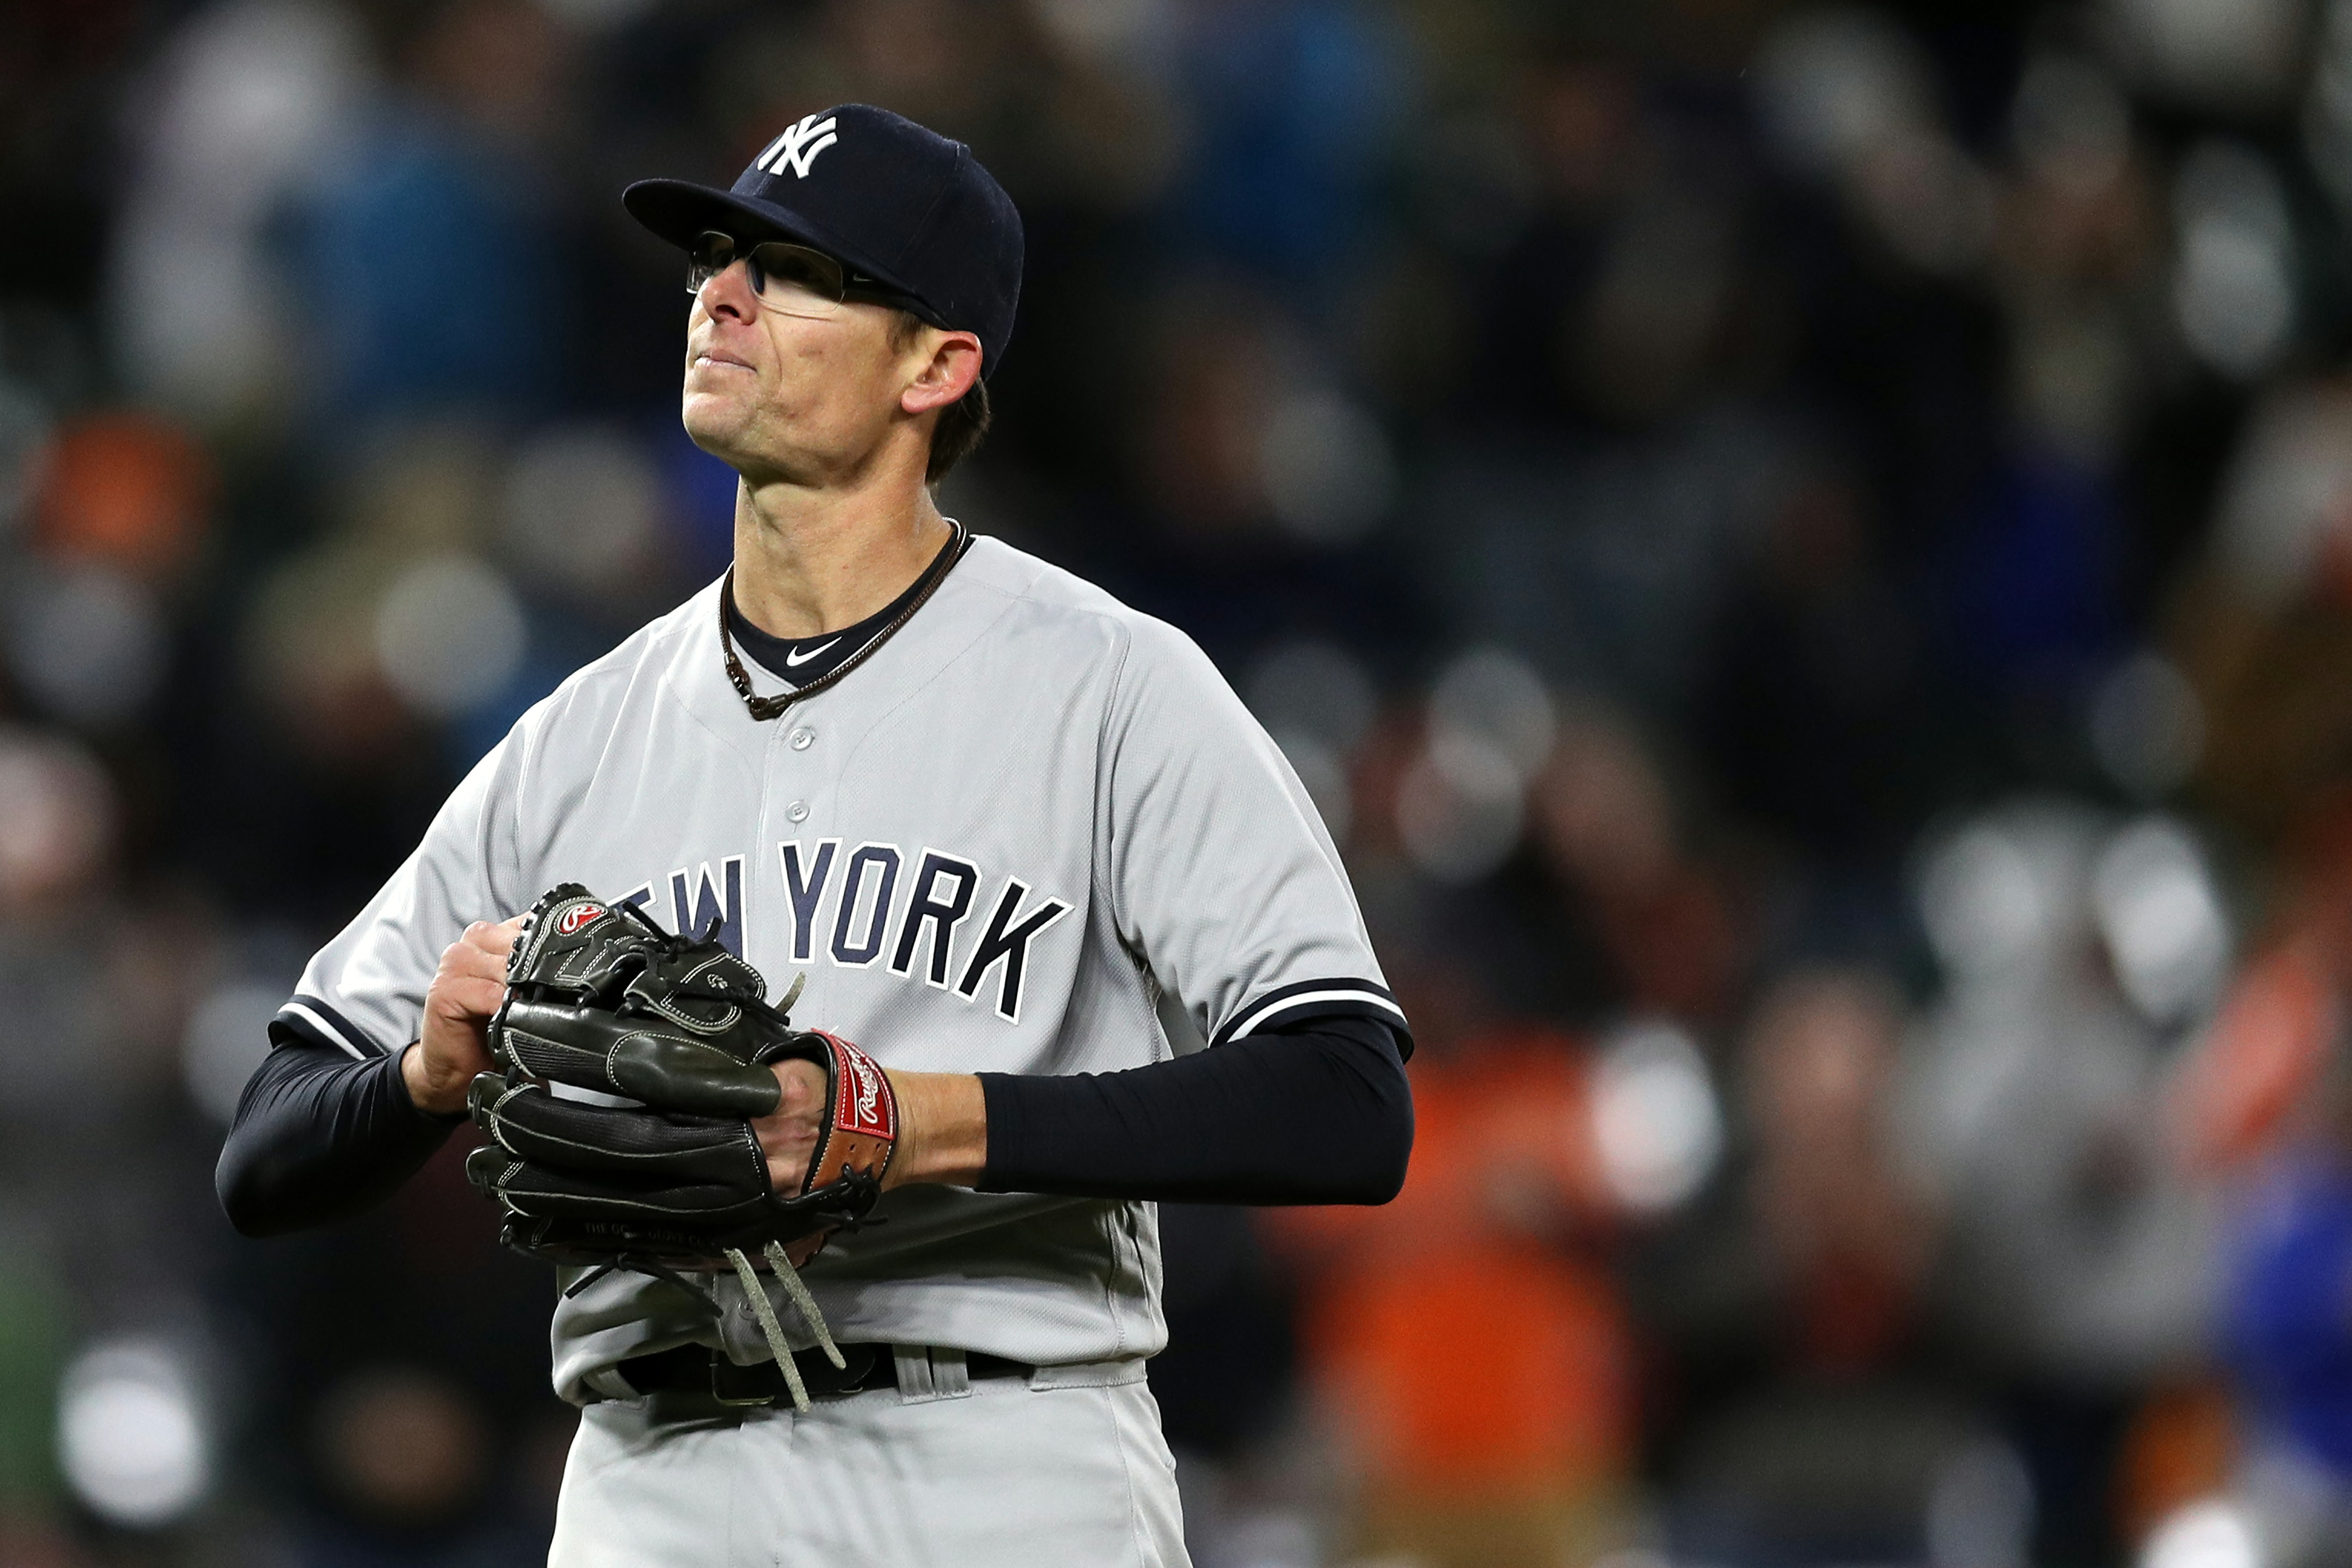 New York Yankees: Tyler Clippard is Criminally Underrated in a